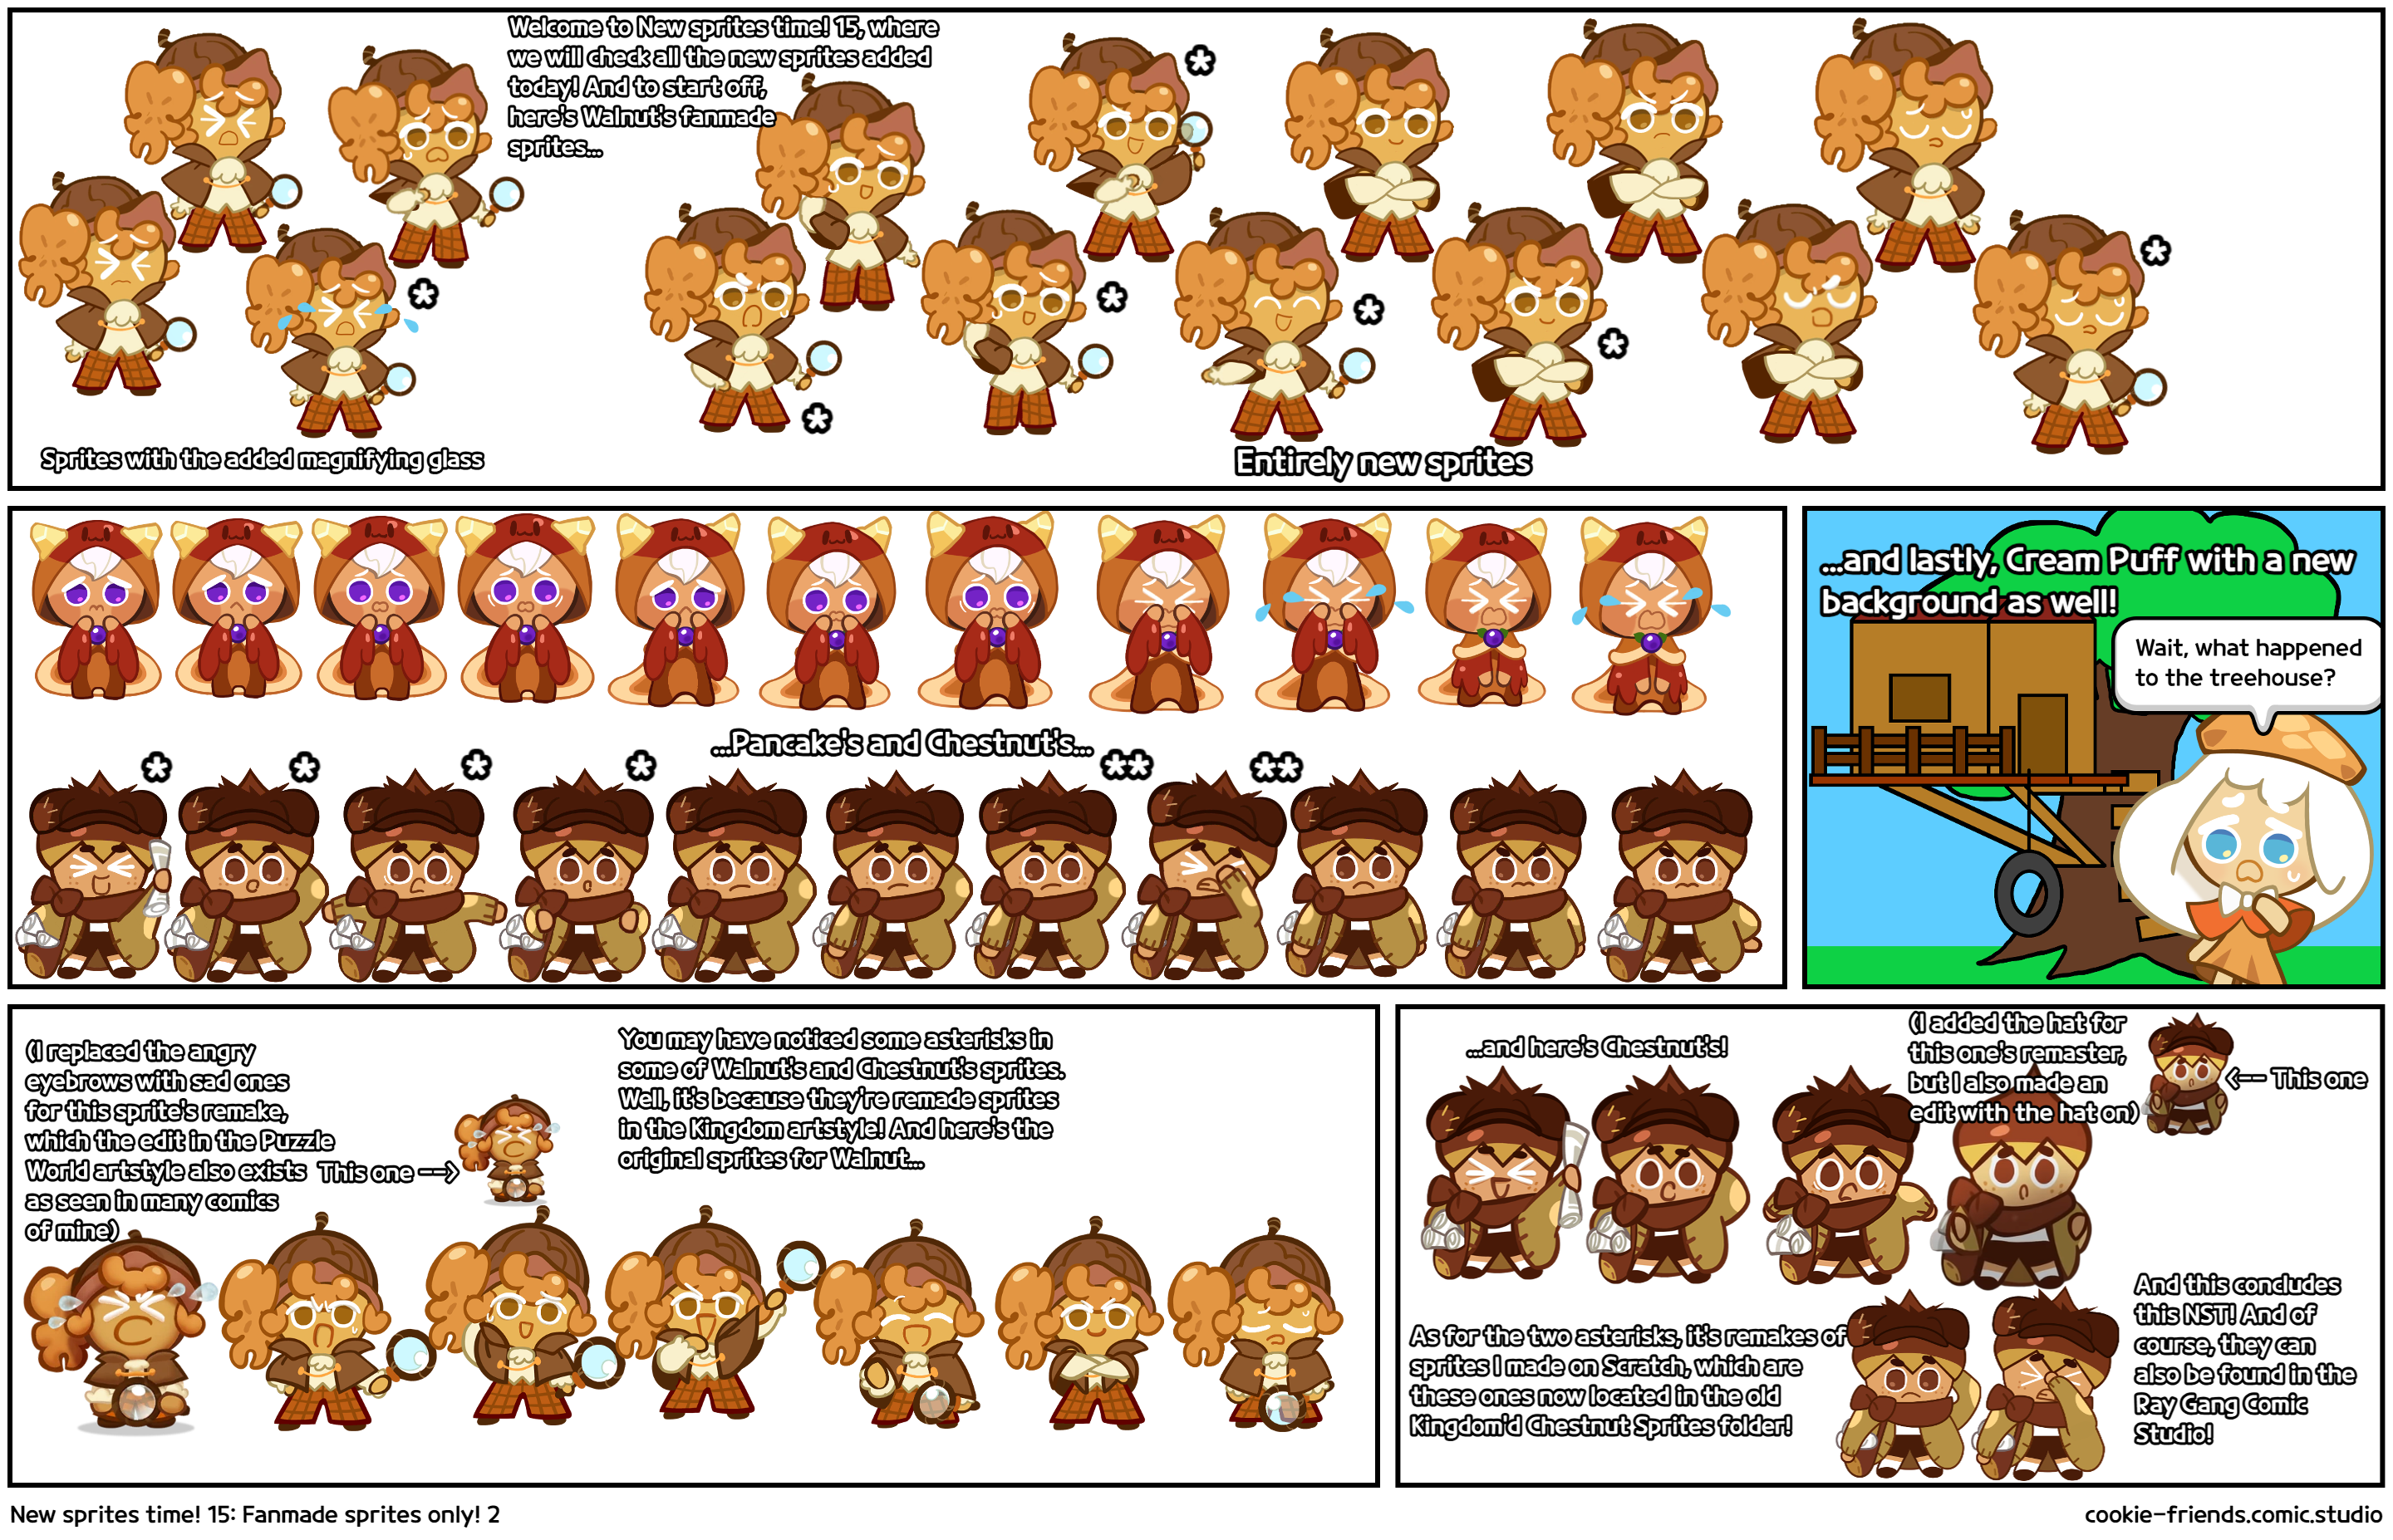 New sprites time! 15: Fanmade sprites only! 2